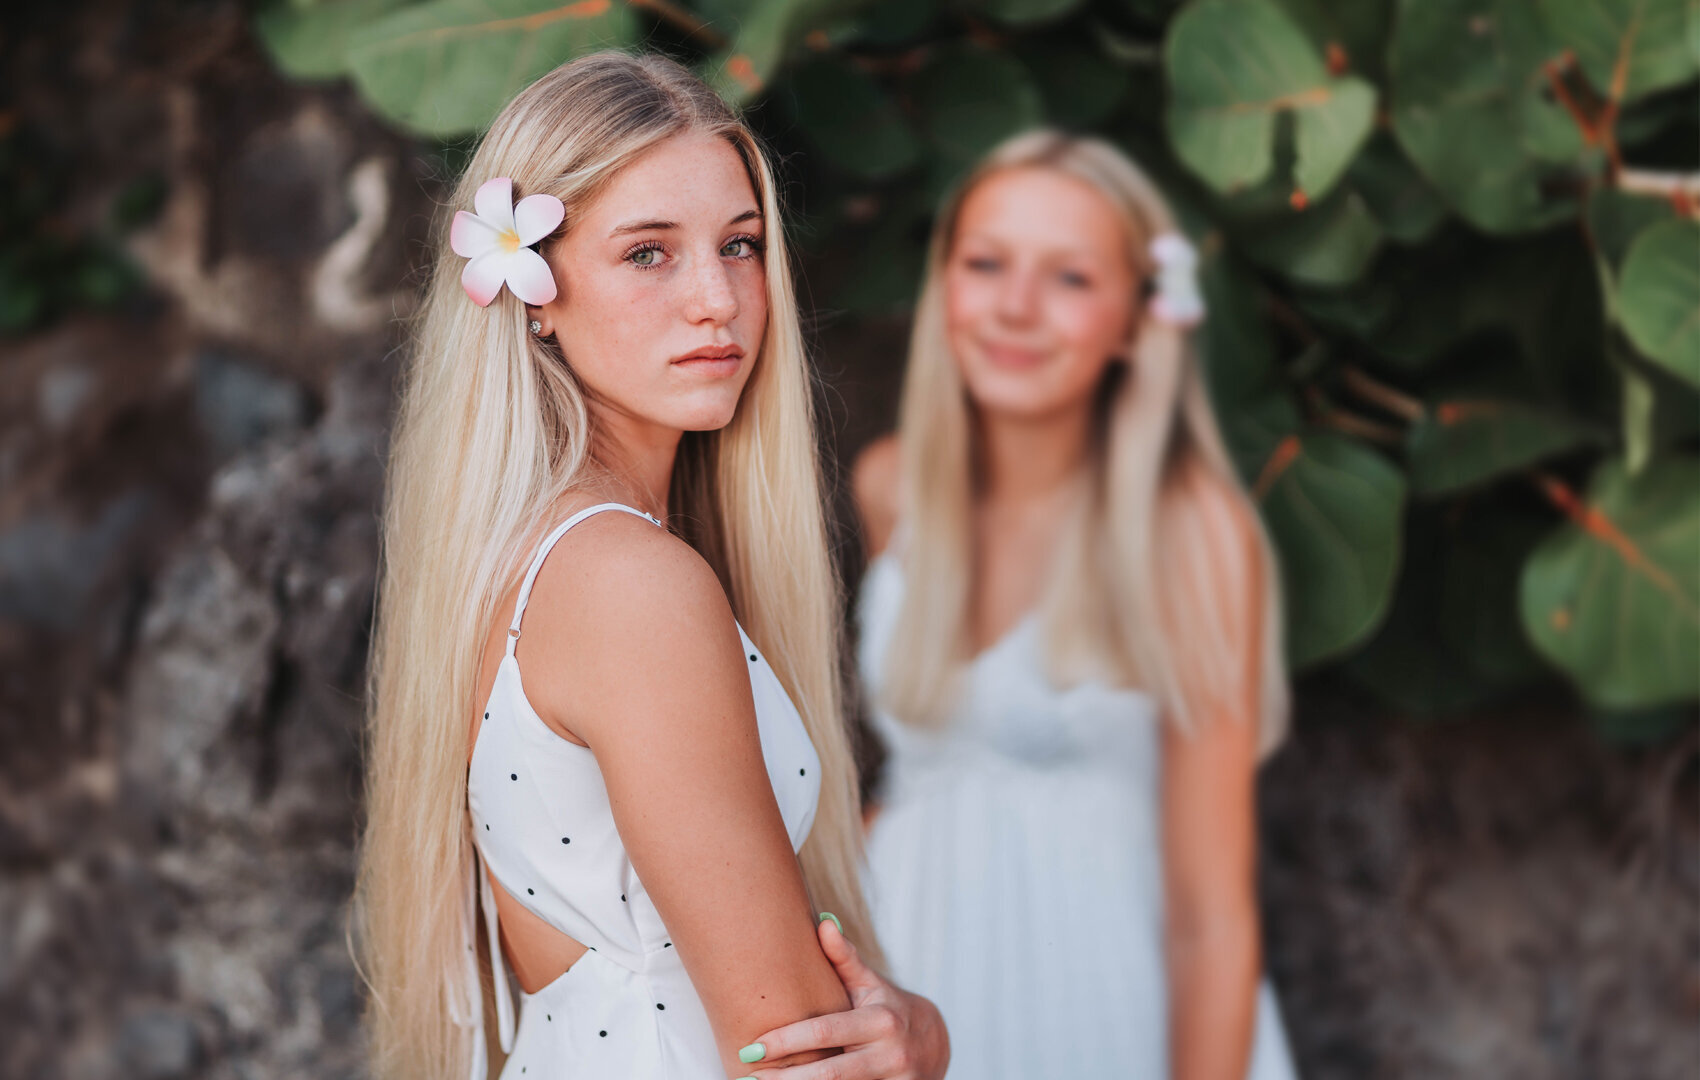 Graduation pictures for two all in white with pretty flowers in their hair.